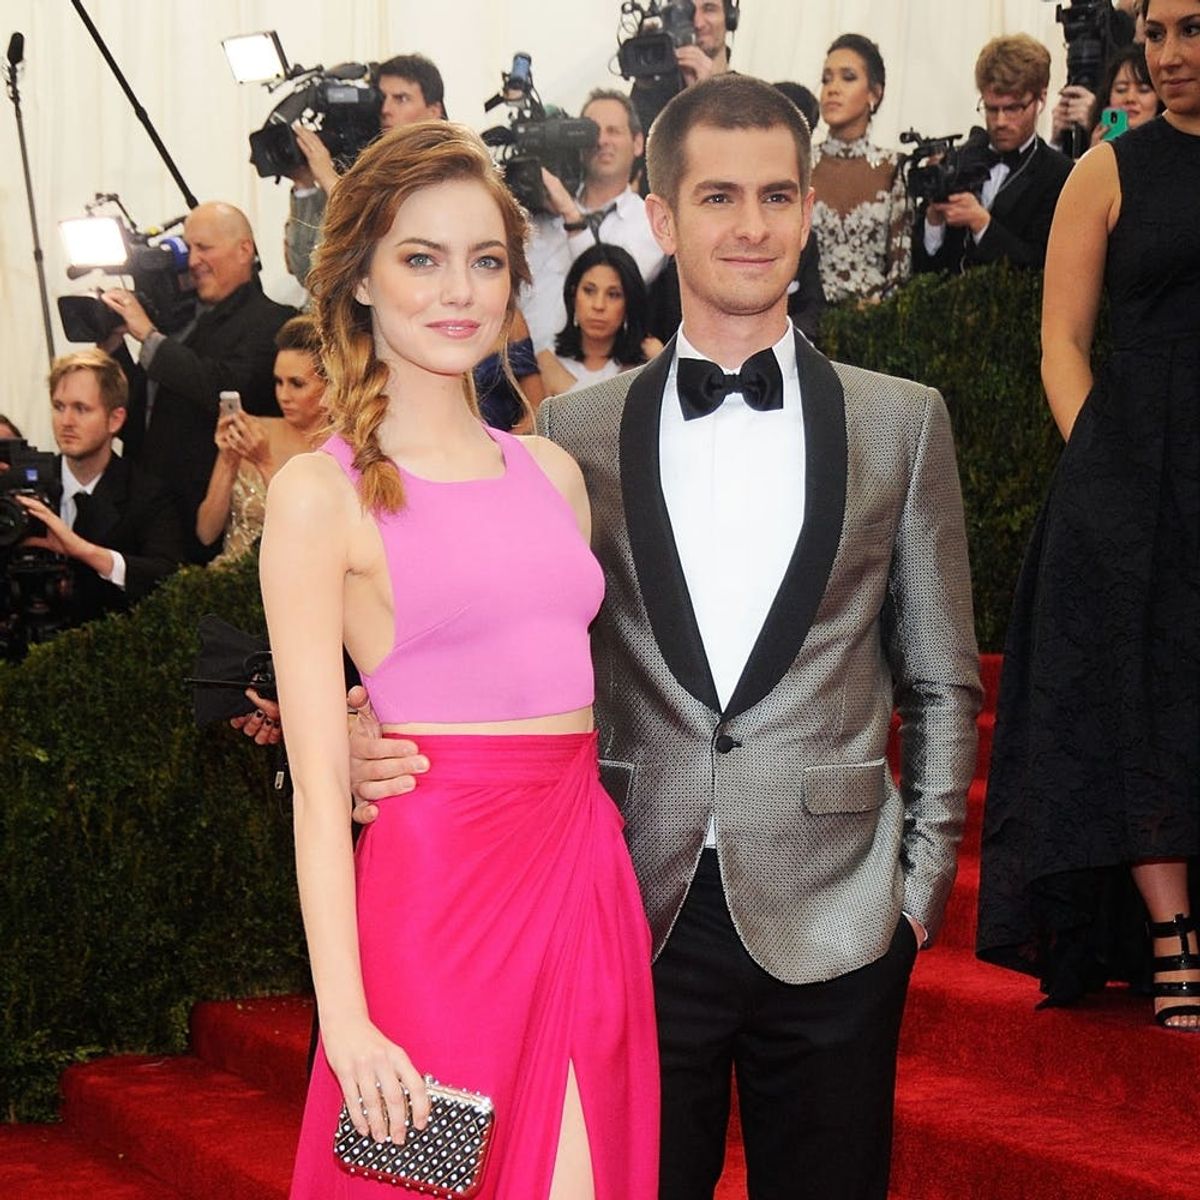 Emma Stone and Andrew Garfield Just Reunited and It Was Everything We Could Have Hoped For